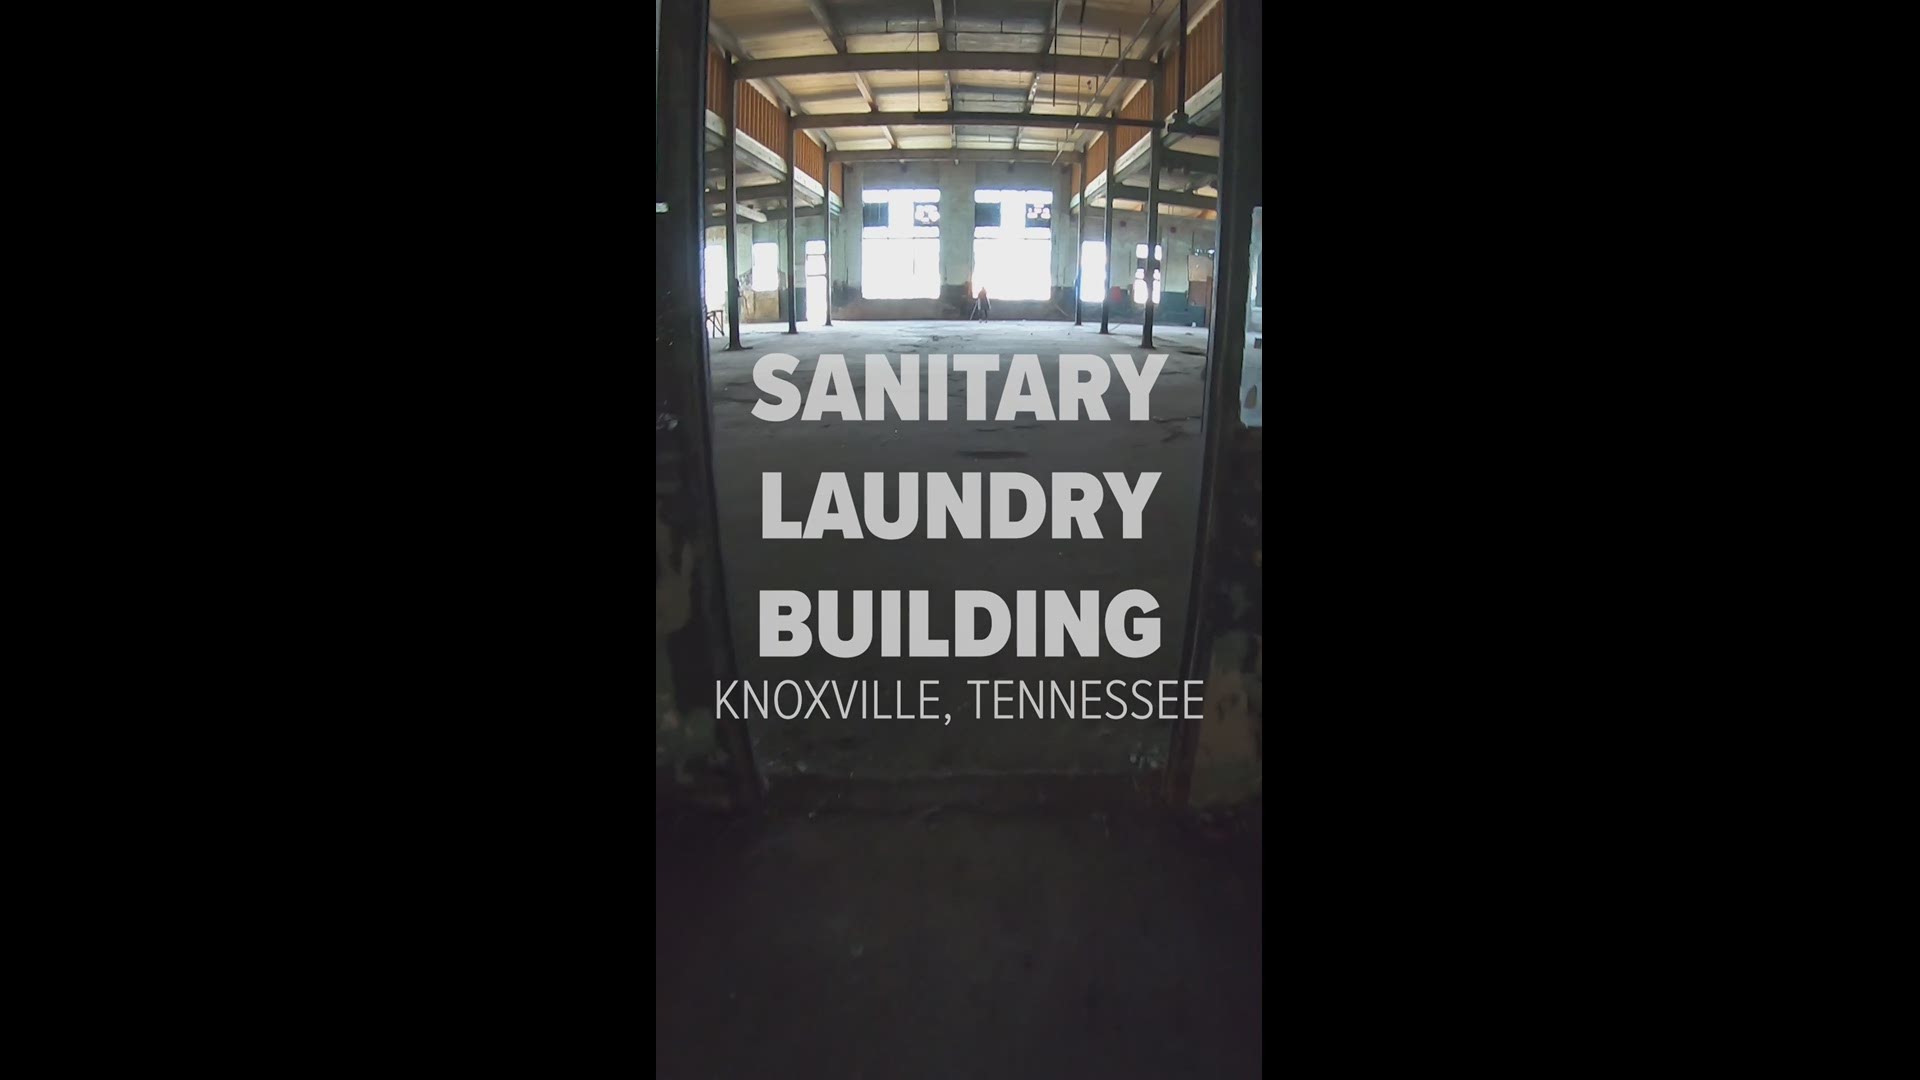 Started in 1926, the Sanitary Laundry Building was once a major employer on the North Broadway corridor.